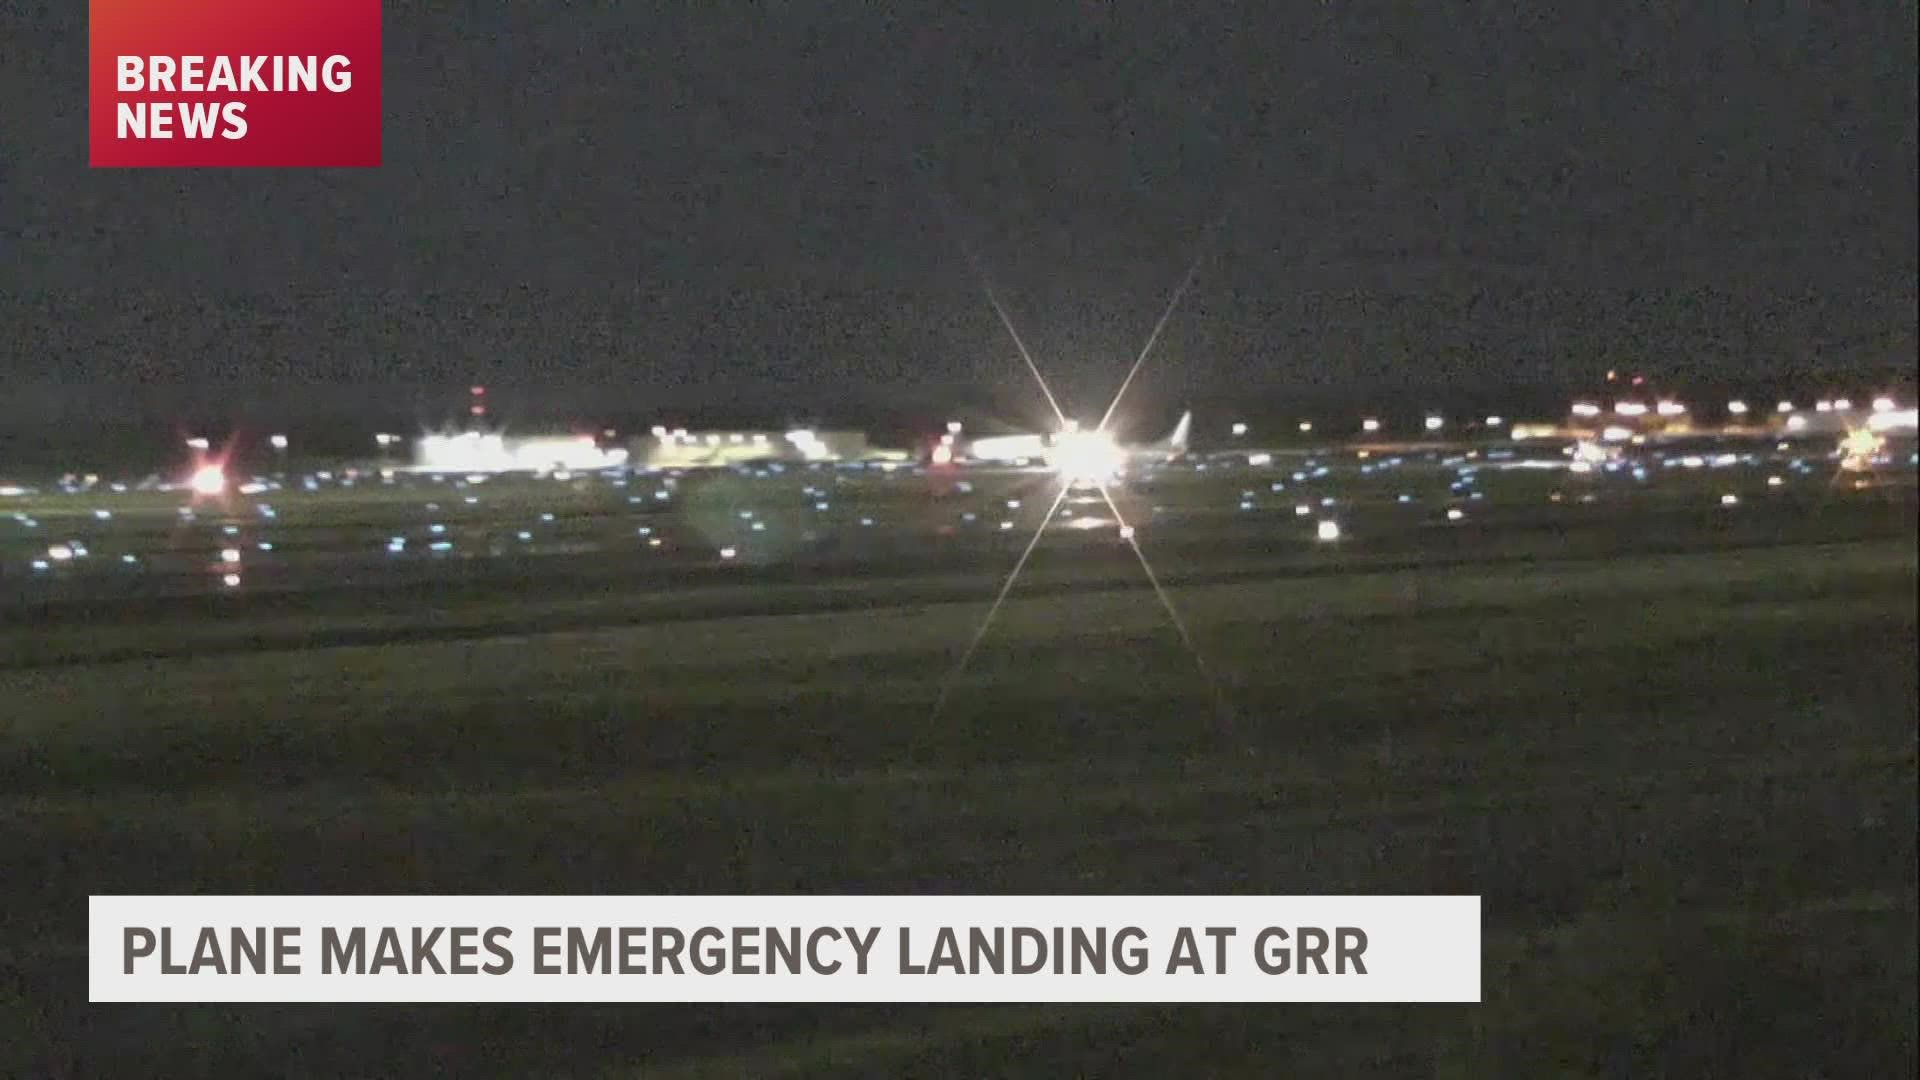 Gerald R. Ford International Airport got an alert at 10:15 p.m. Friday night that an American Airlines flight was making an emergency landing.